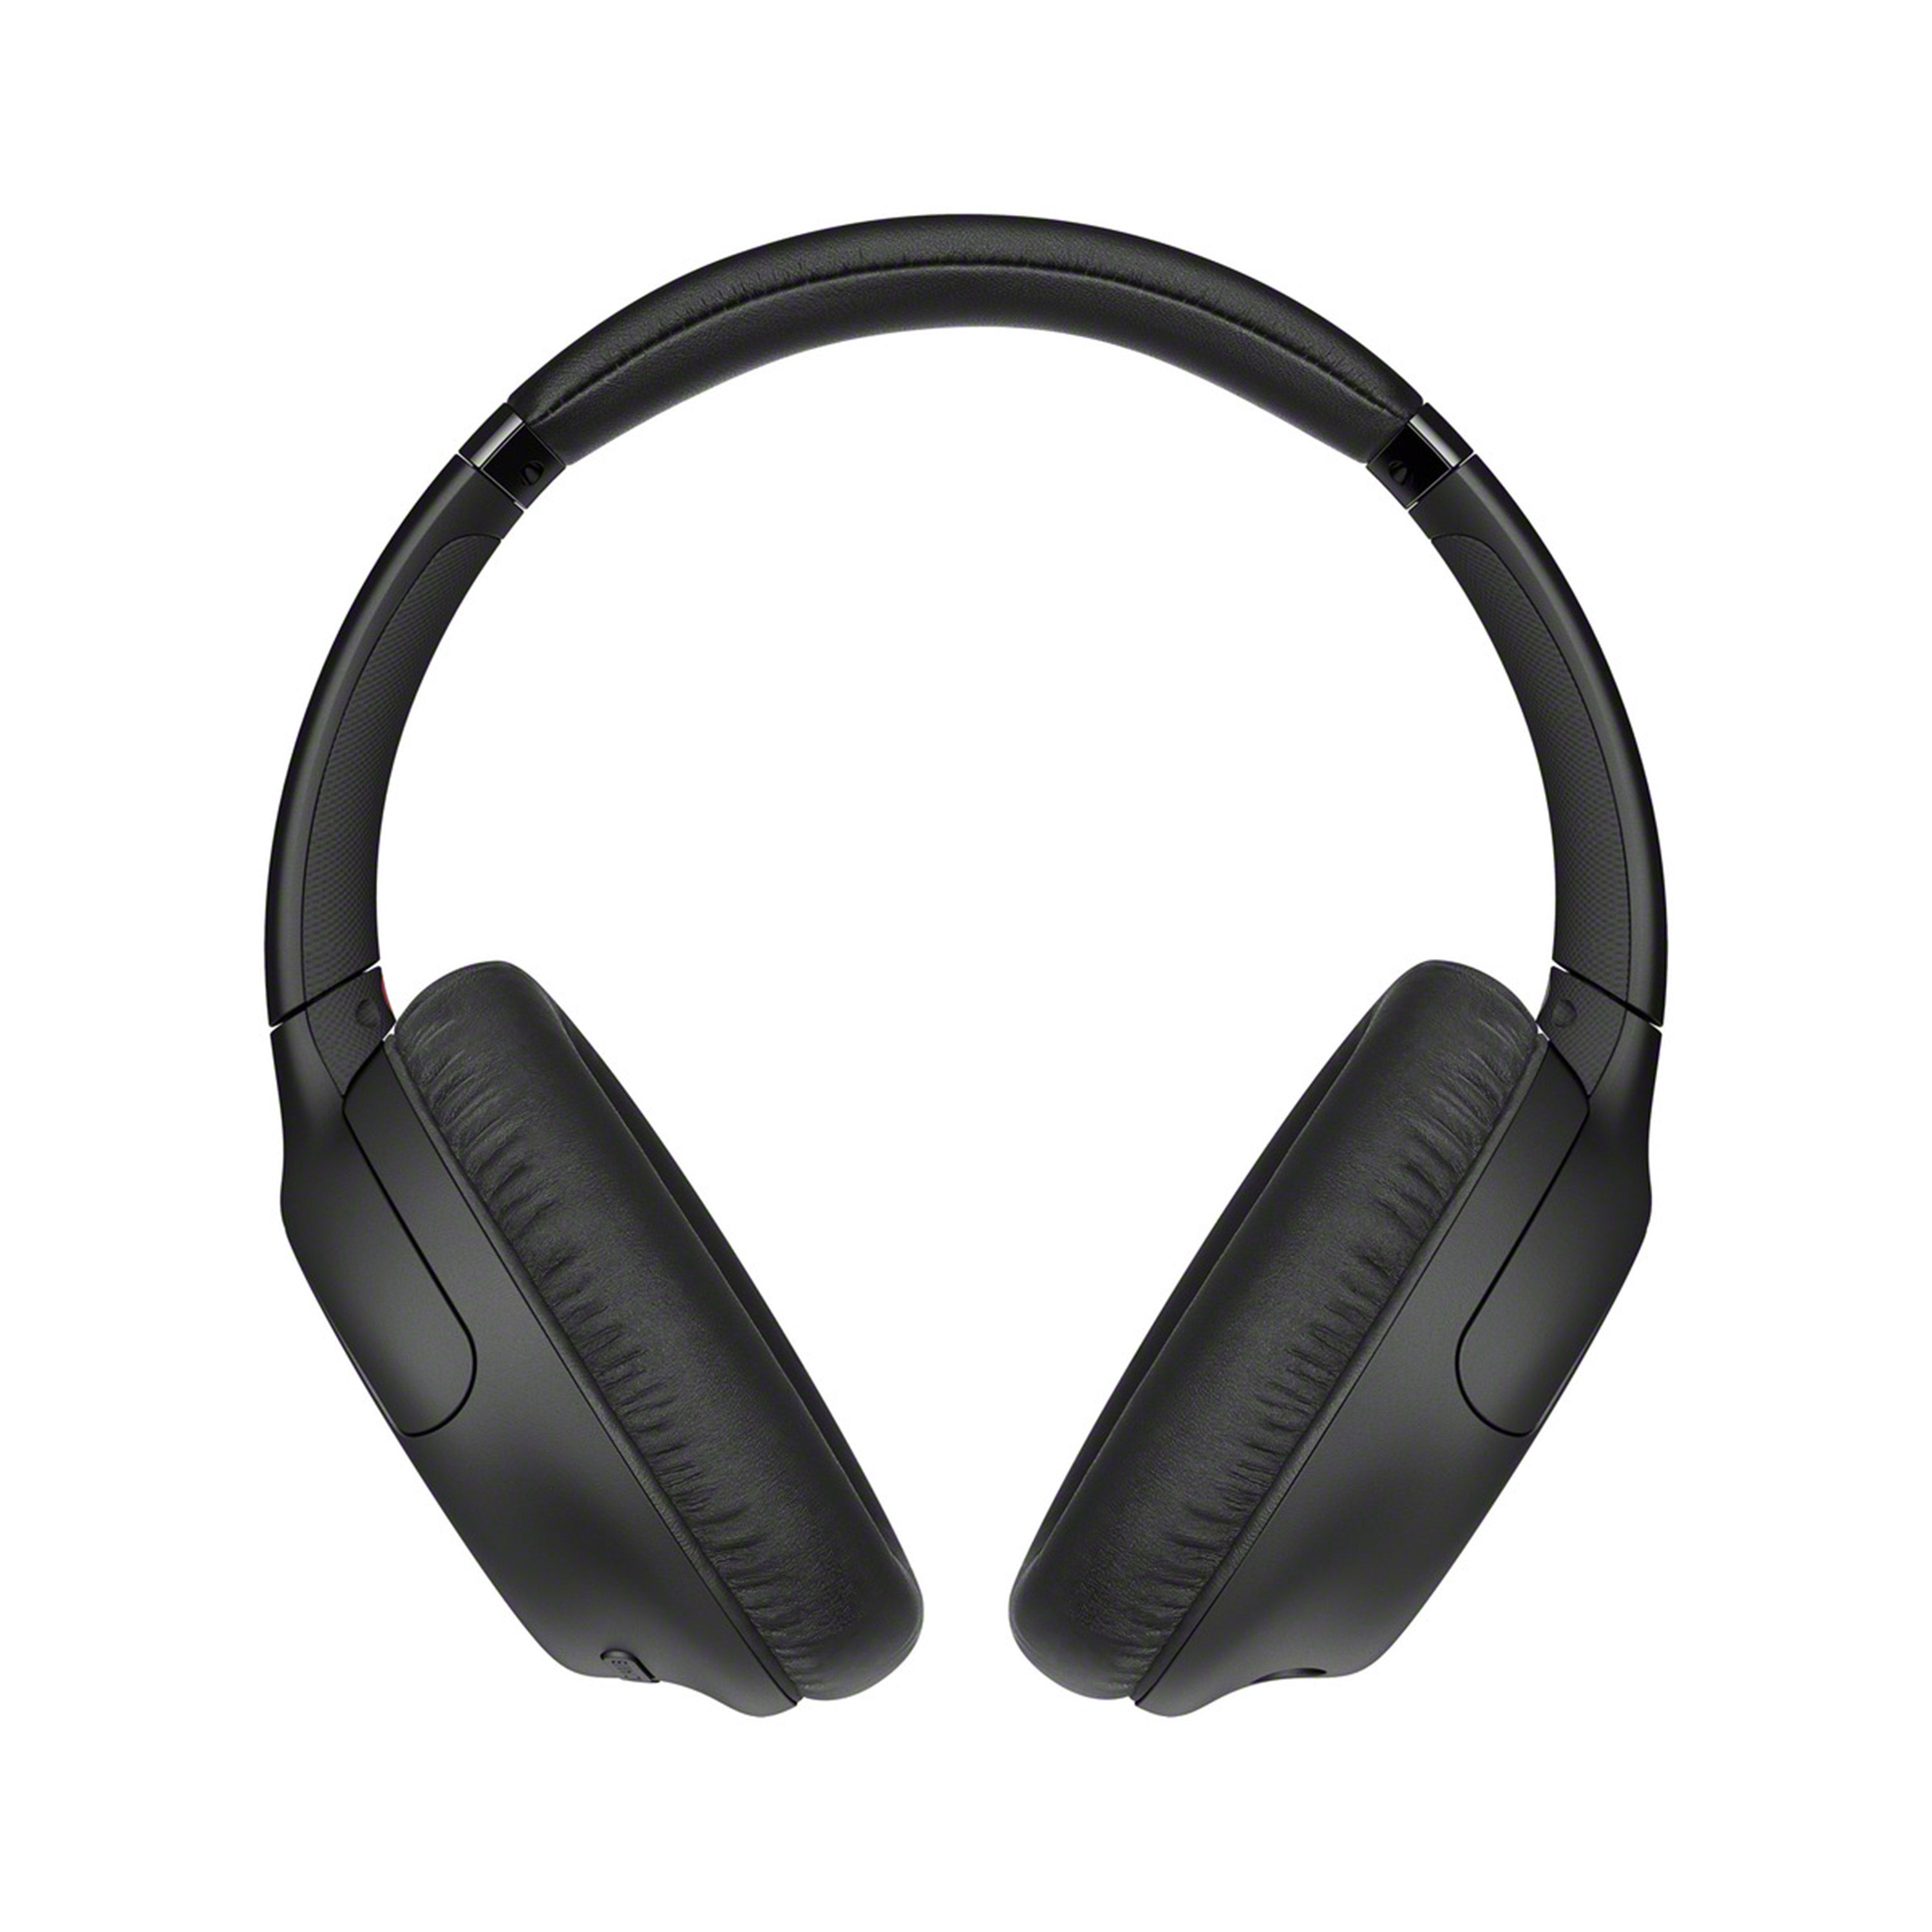 WH-CH710N Wireless Noise Cancelling Headphones